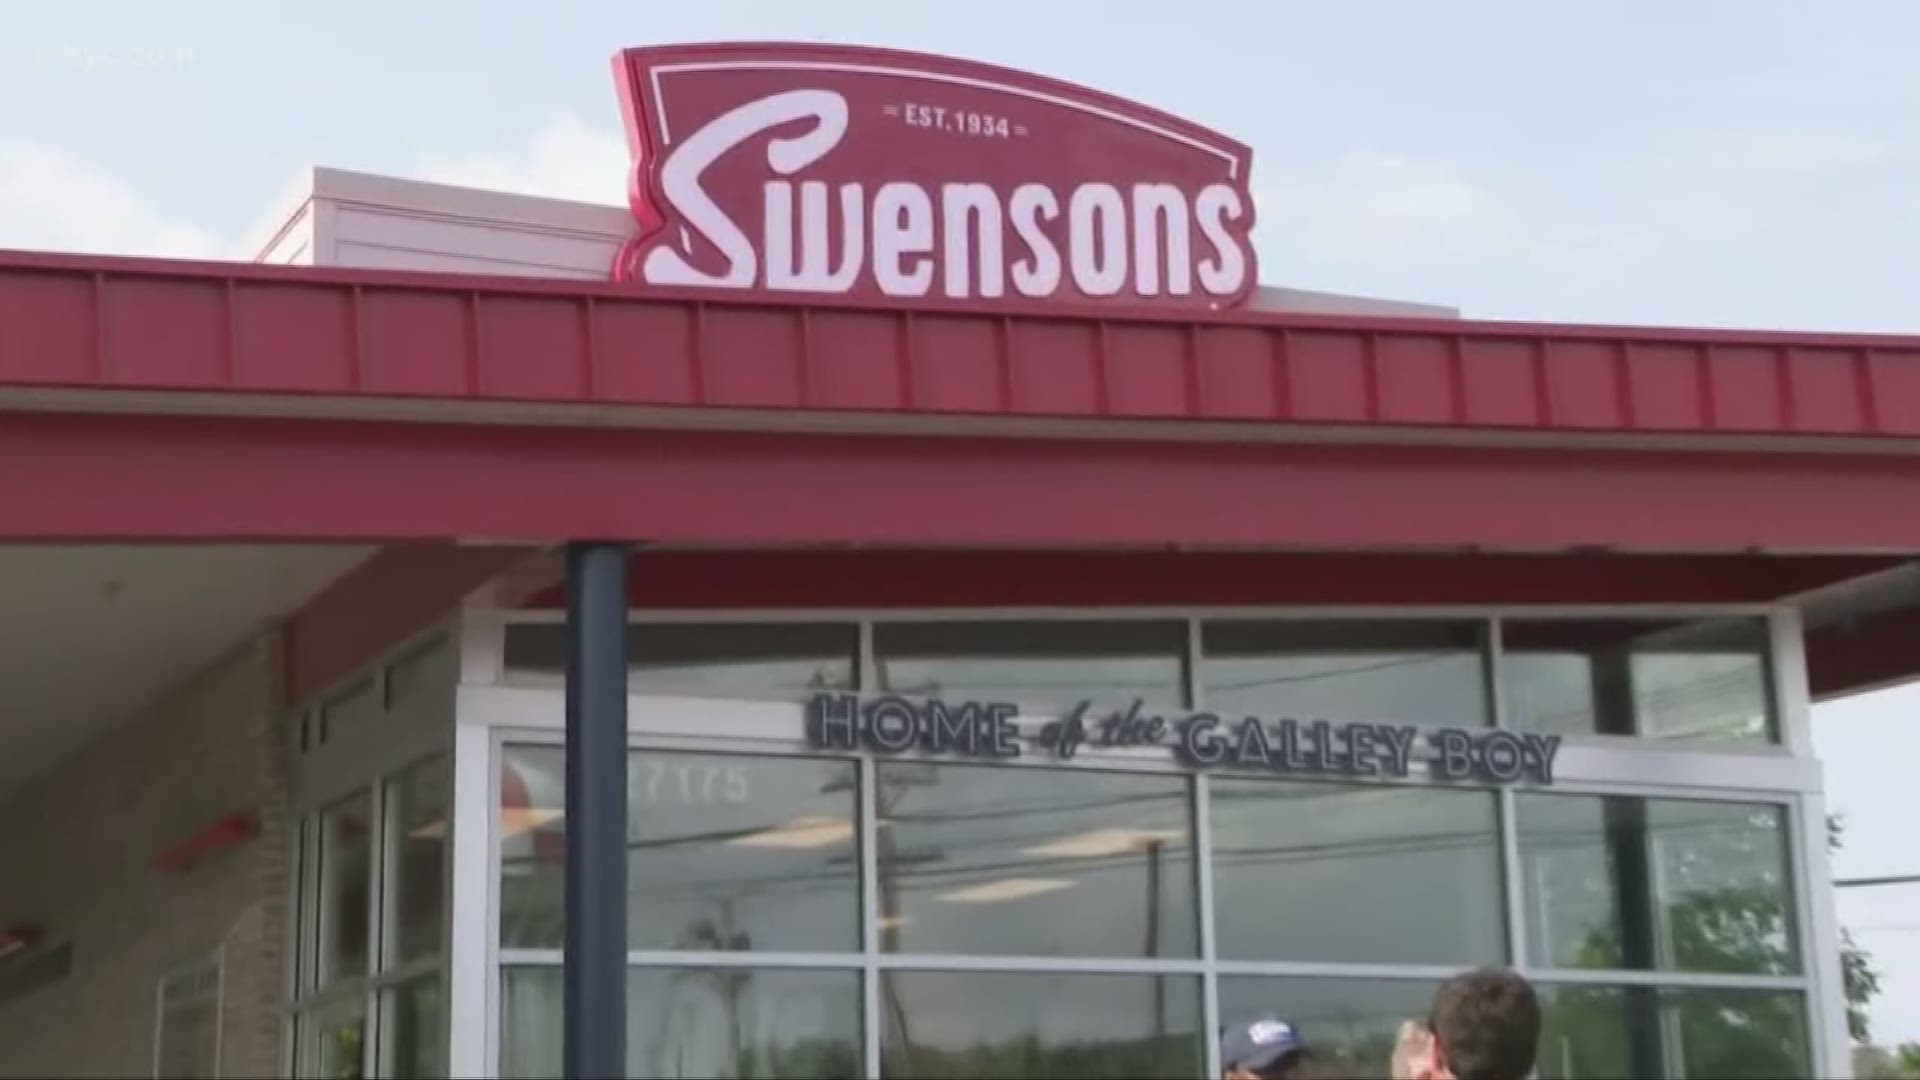 Aug. 10, 2018: Swensons, the iconic Akron burger chain, officially opened its new location in North Olmsted.